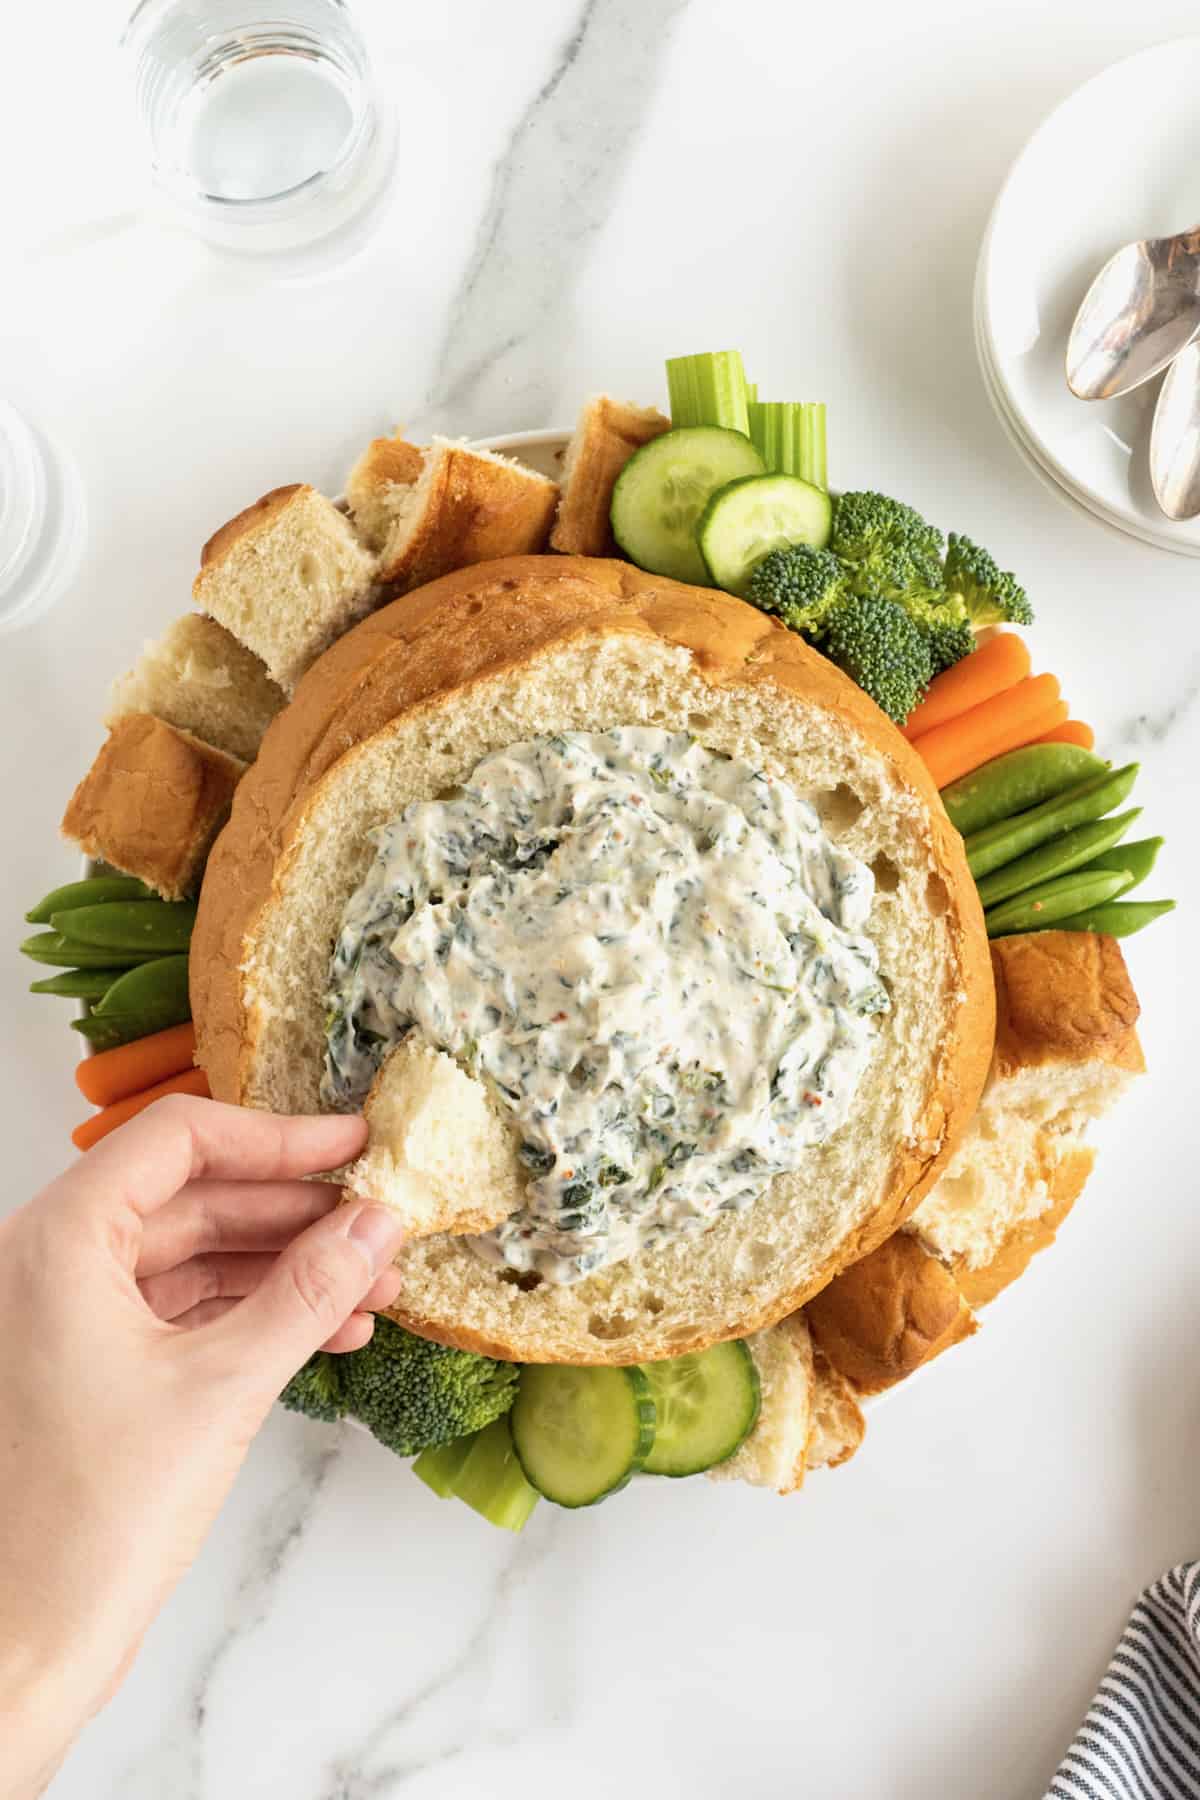 Creamy spinach dip in a bread bowl surrounded by fresh vegetables and bread chunks.